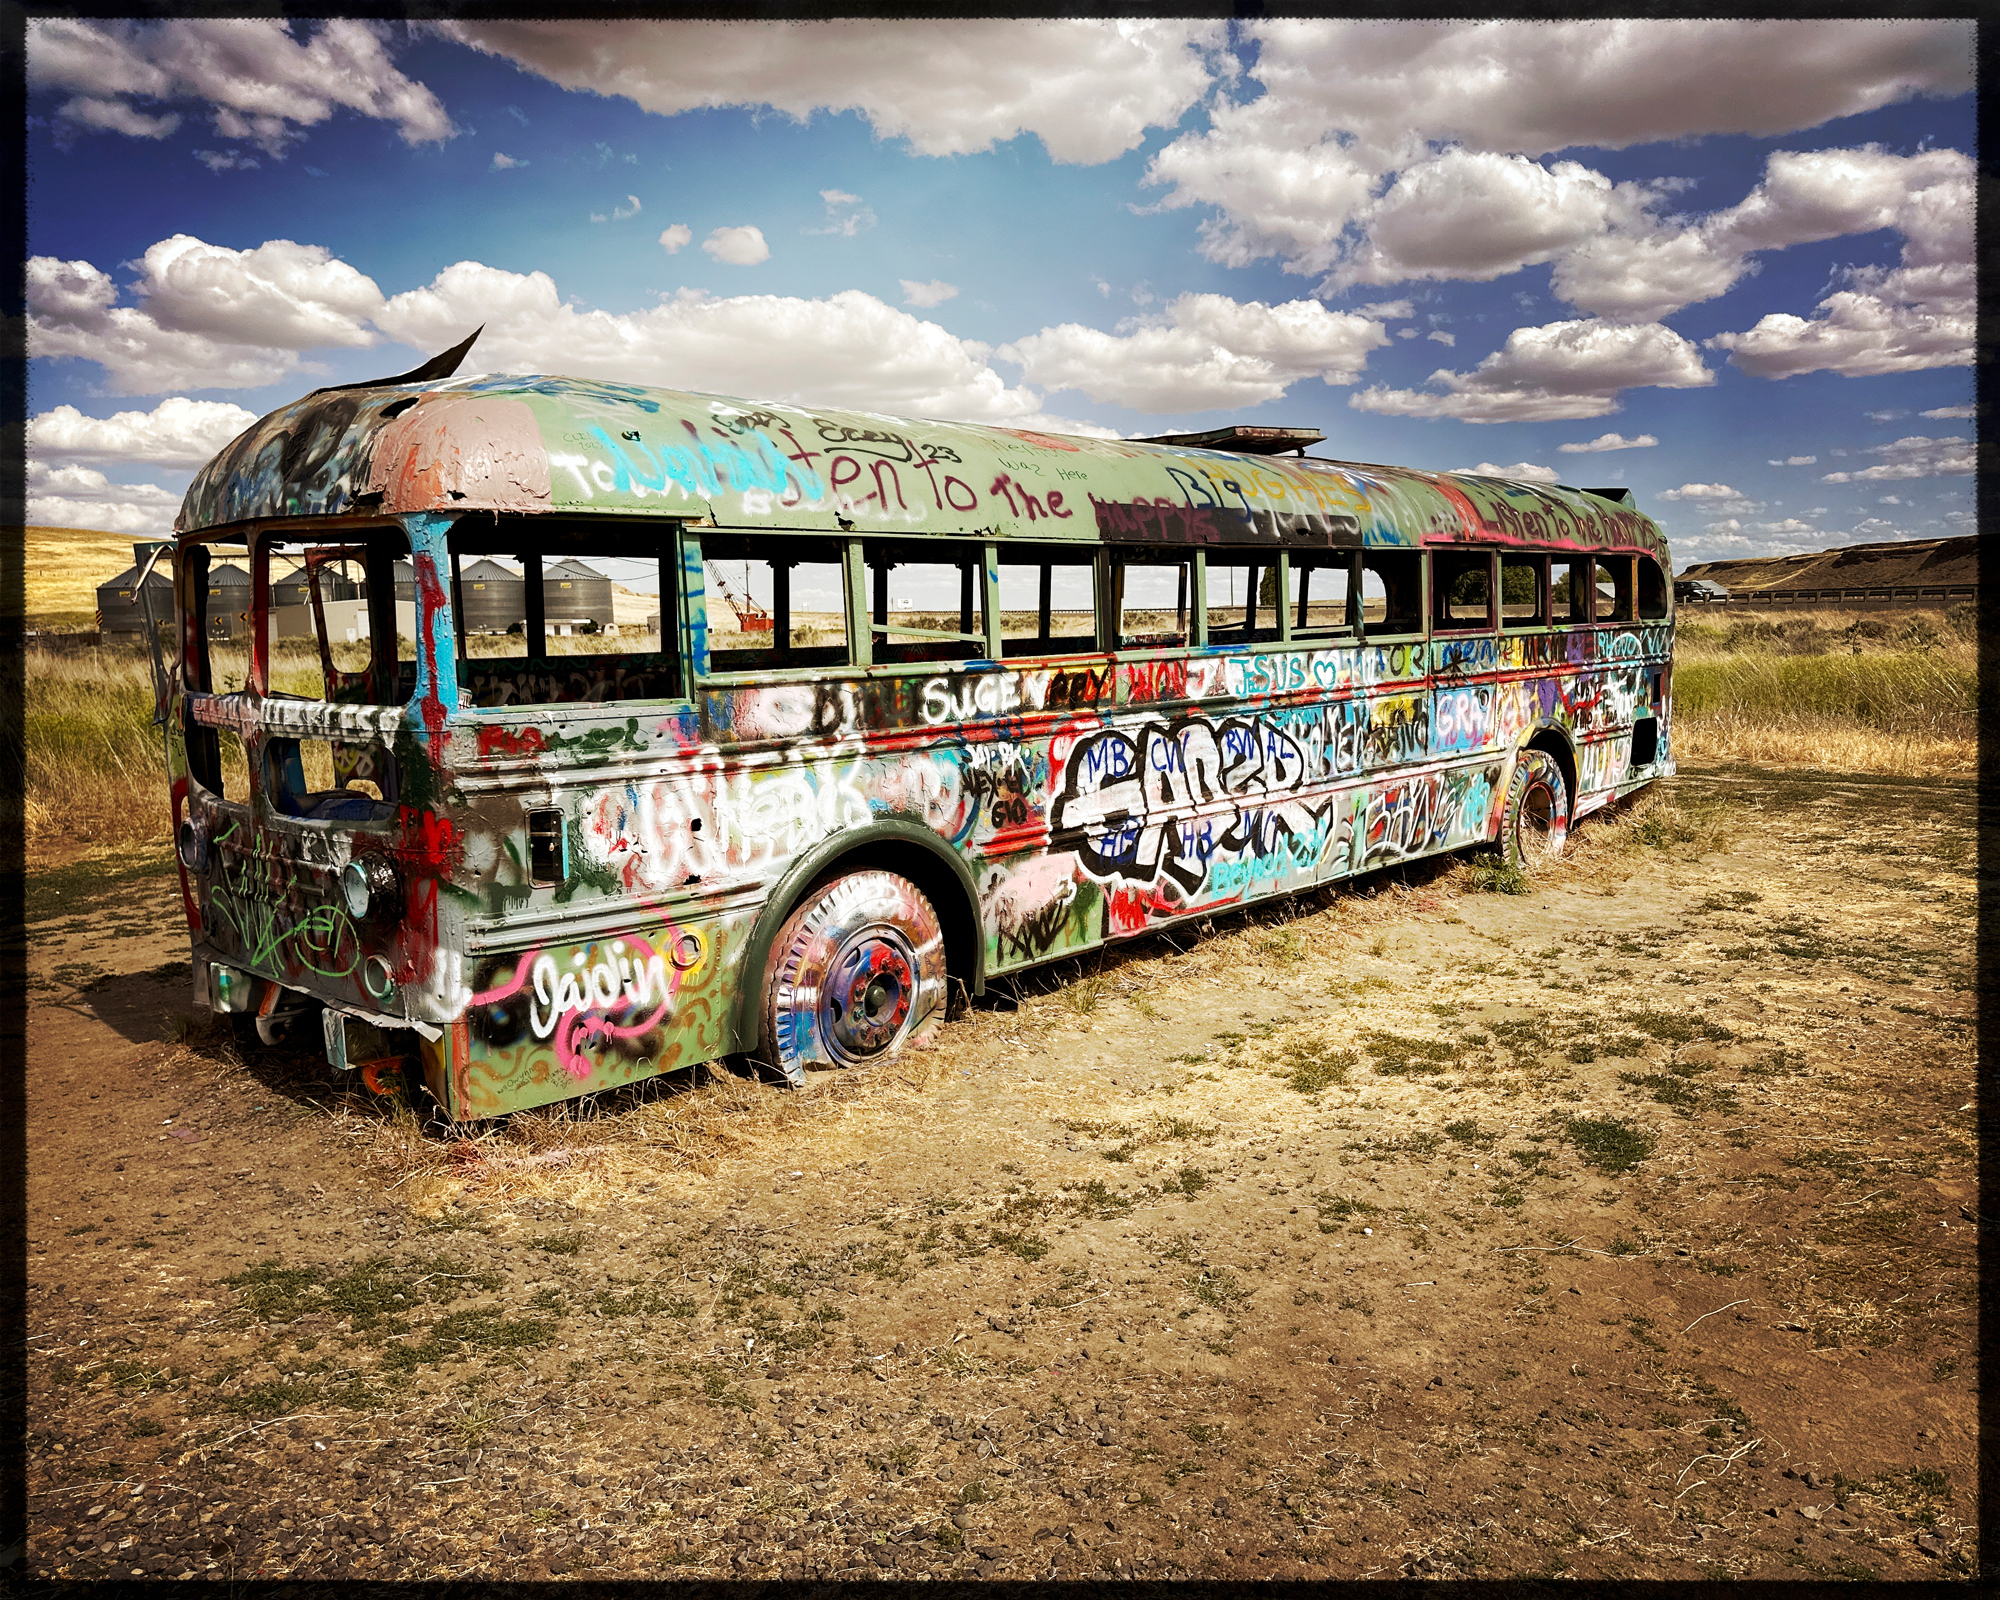 Another must see and stop location. The Magic Bus begs for visitors to stop and ad their names to this abandoned bus. The pain must be an inch thick on it.